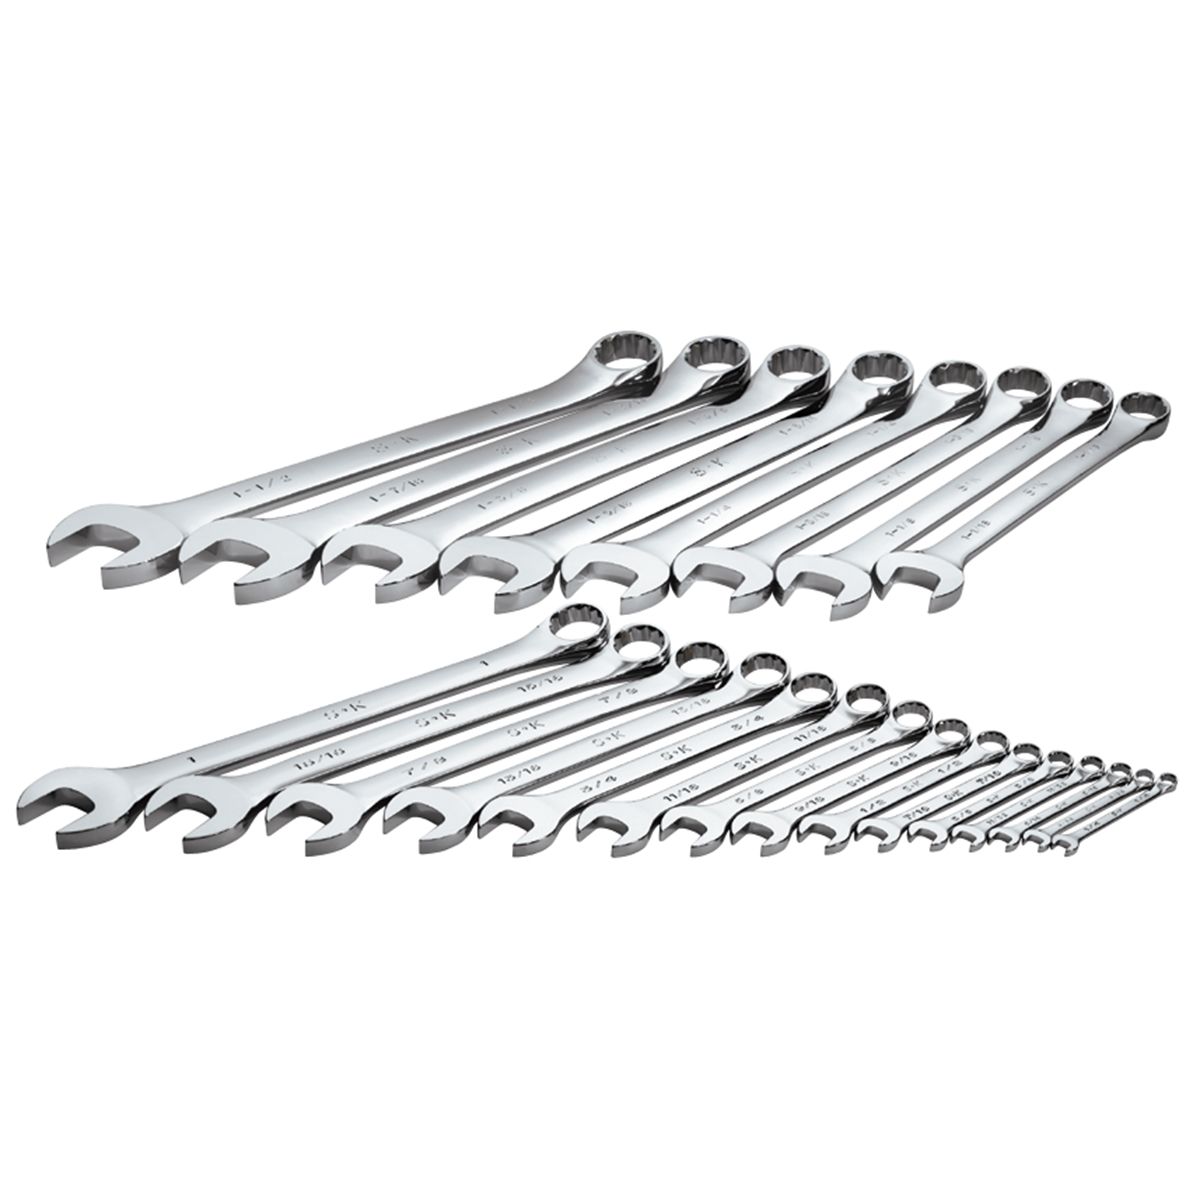 SuperKrome Fractional Combination Wrench Set - 23-Pc